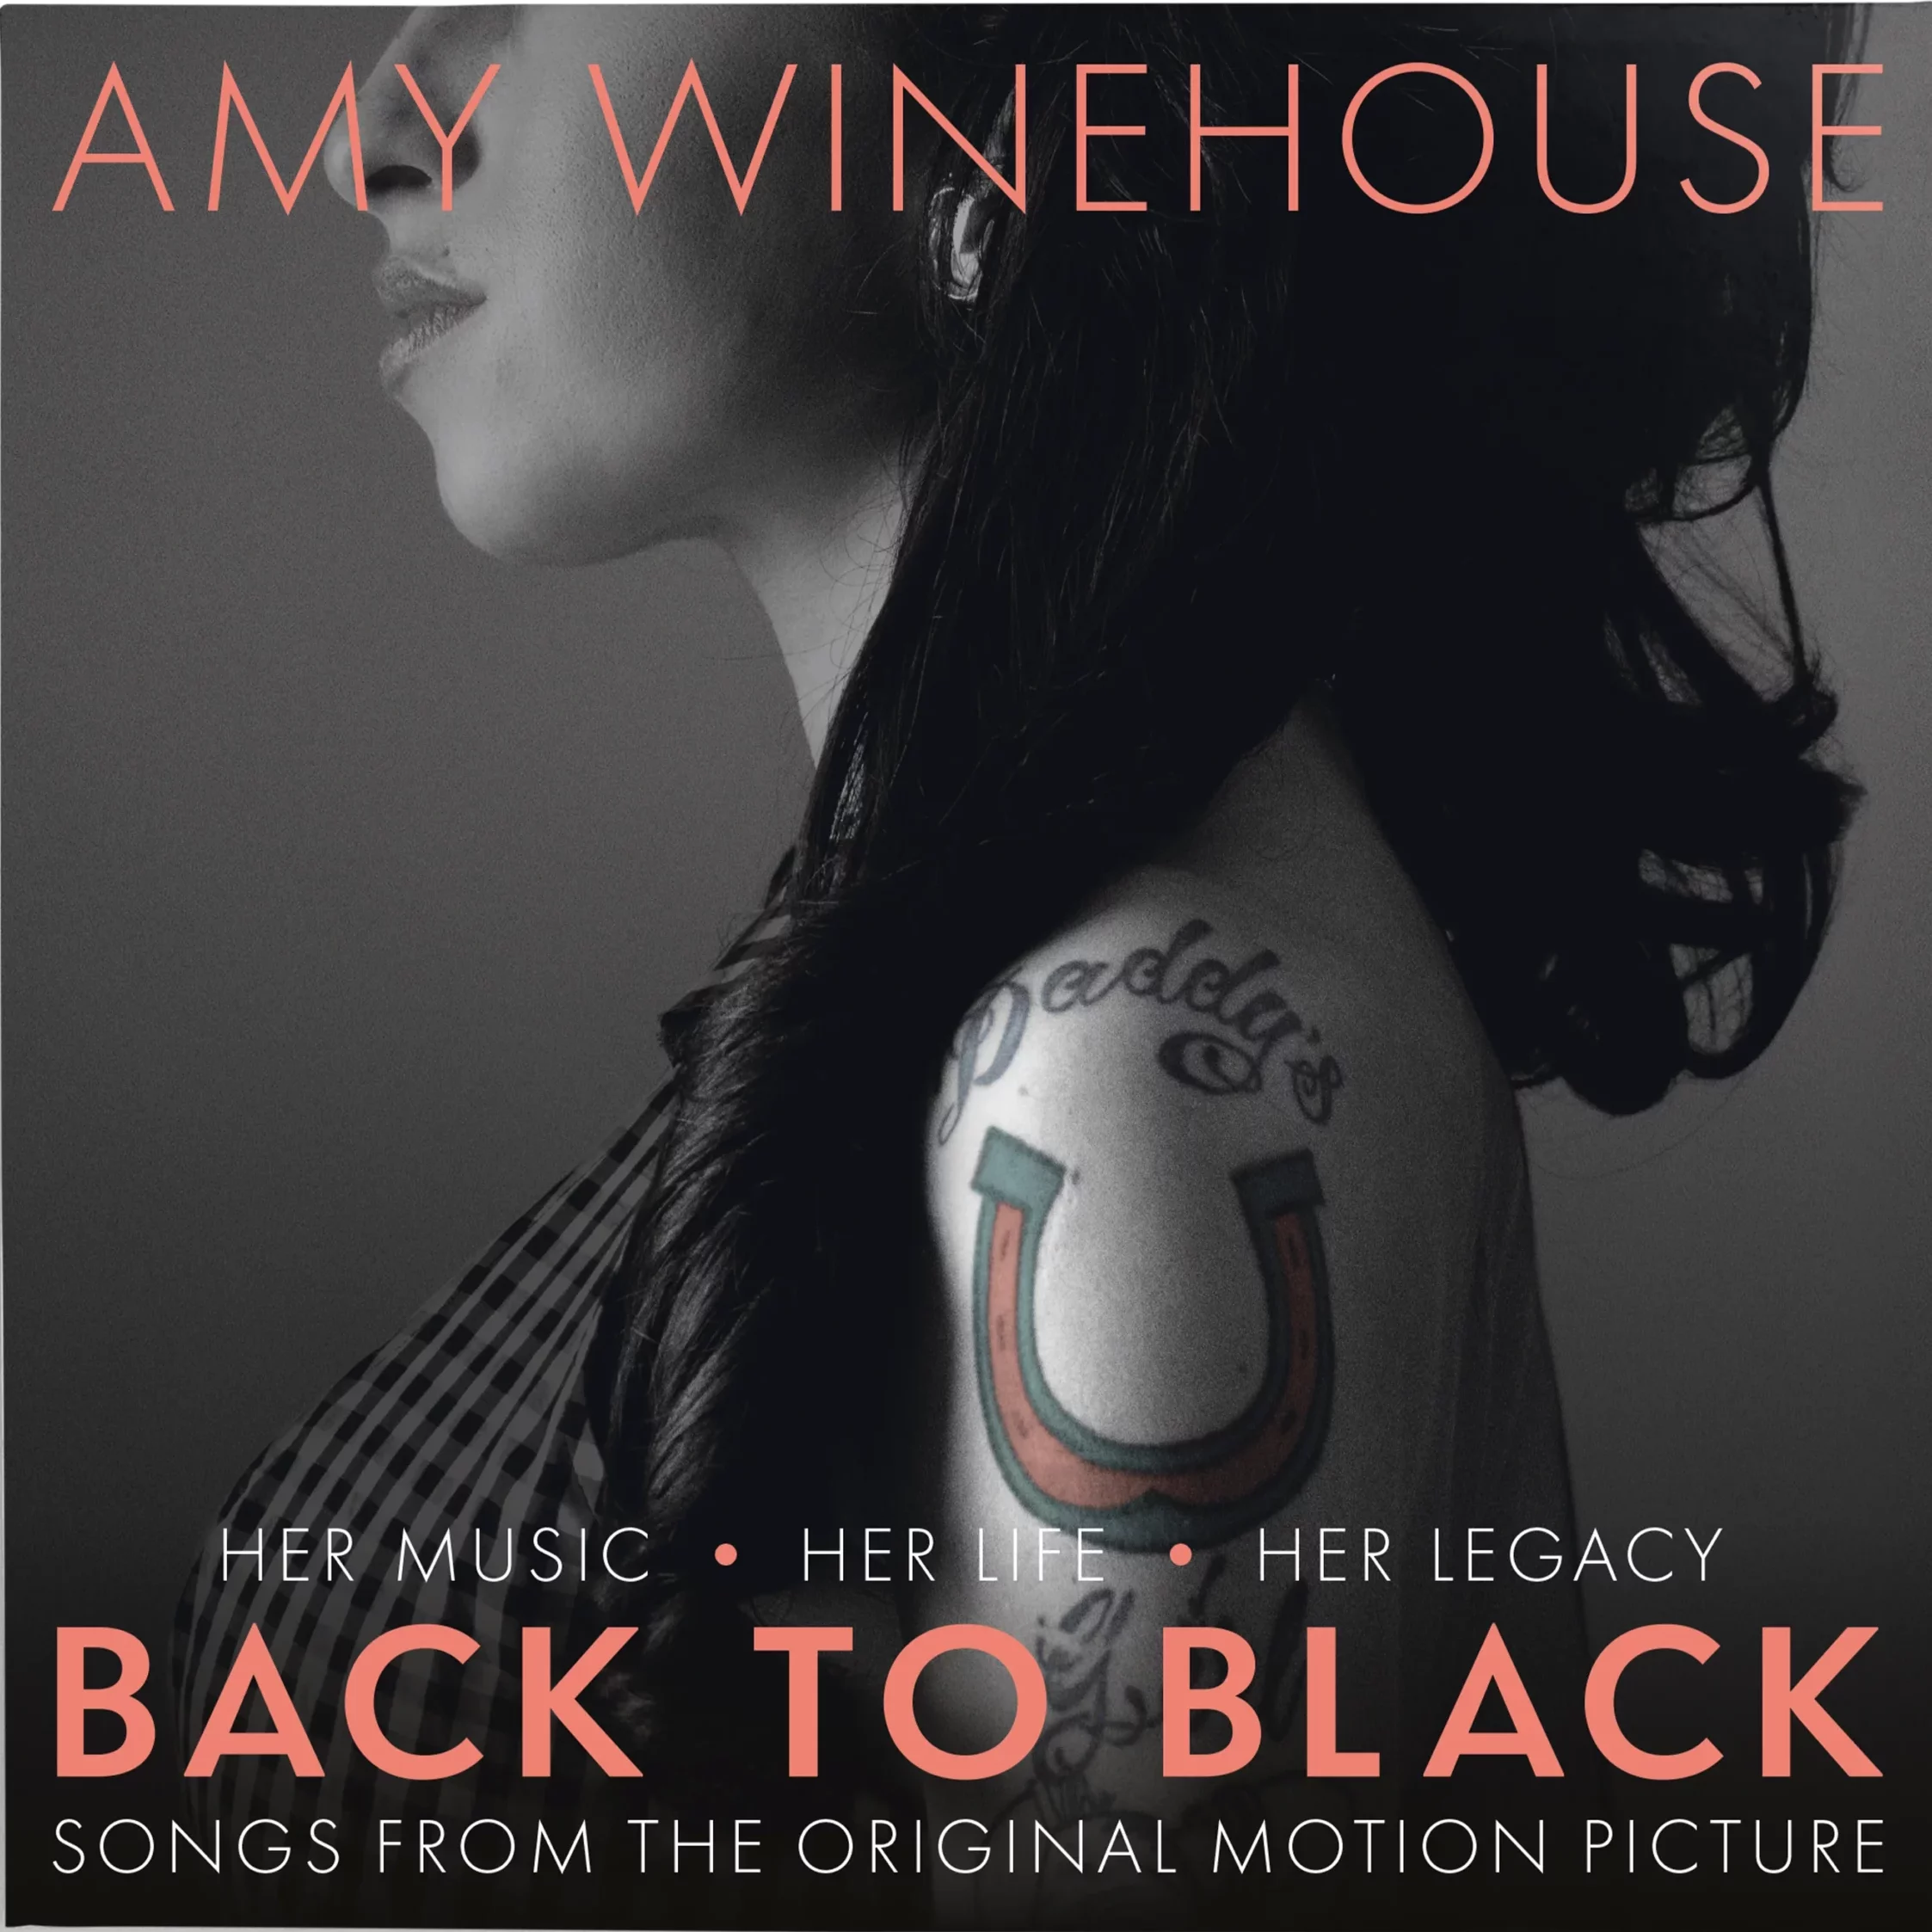 Amy Winehouse - Back to Black: Songs from the Original Motion Picture